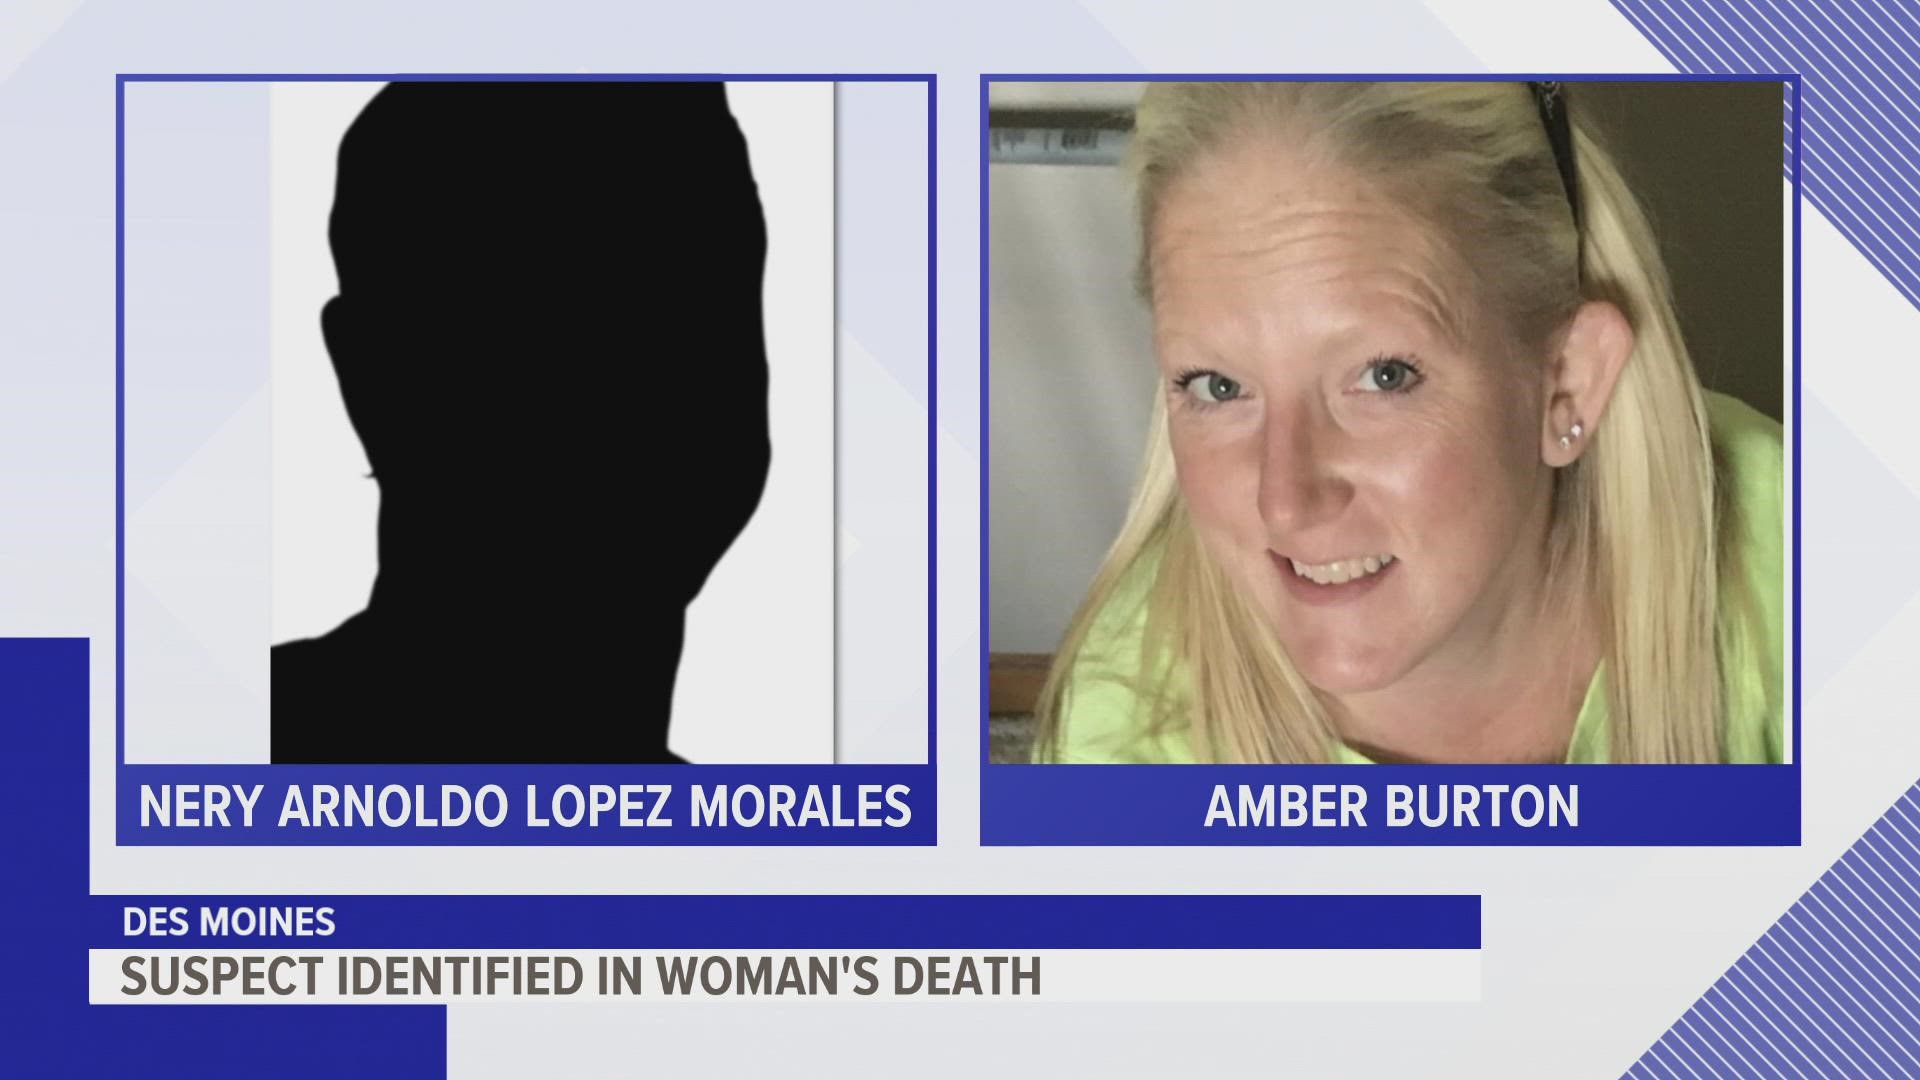 Police have since arrested and charged 50-year-old Nery Arnoldo Lopez Morales with first-degree murder for the death of 42-year-old Amber Burton.